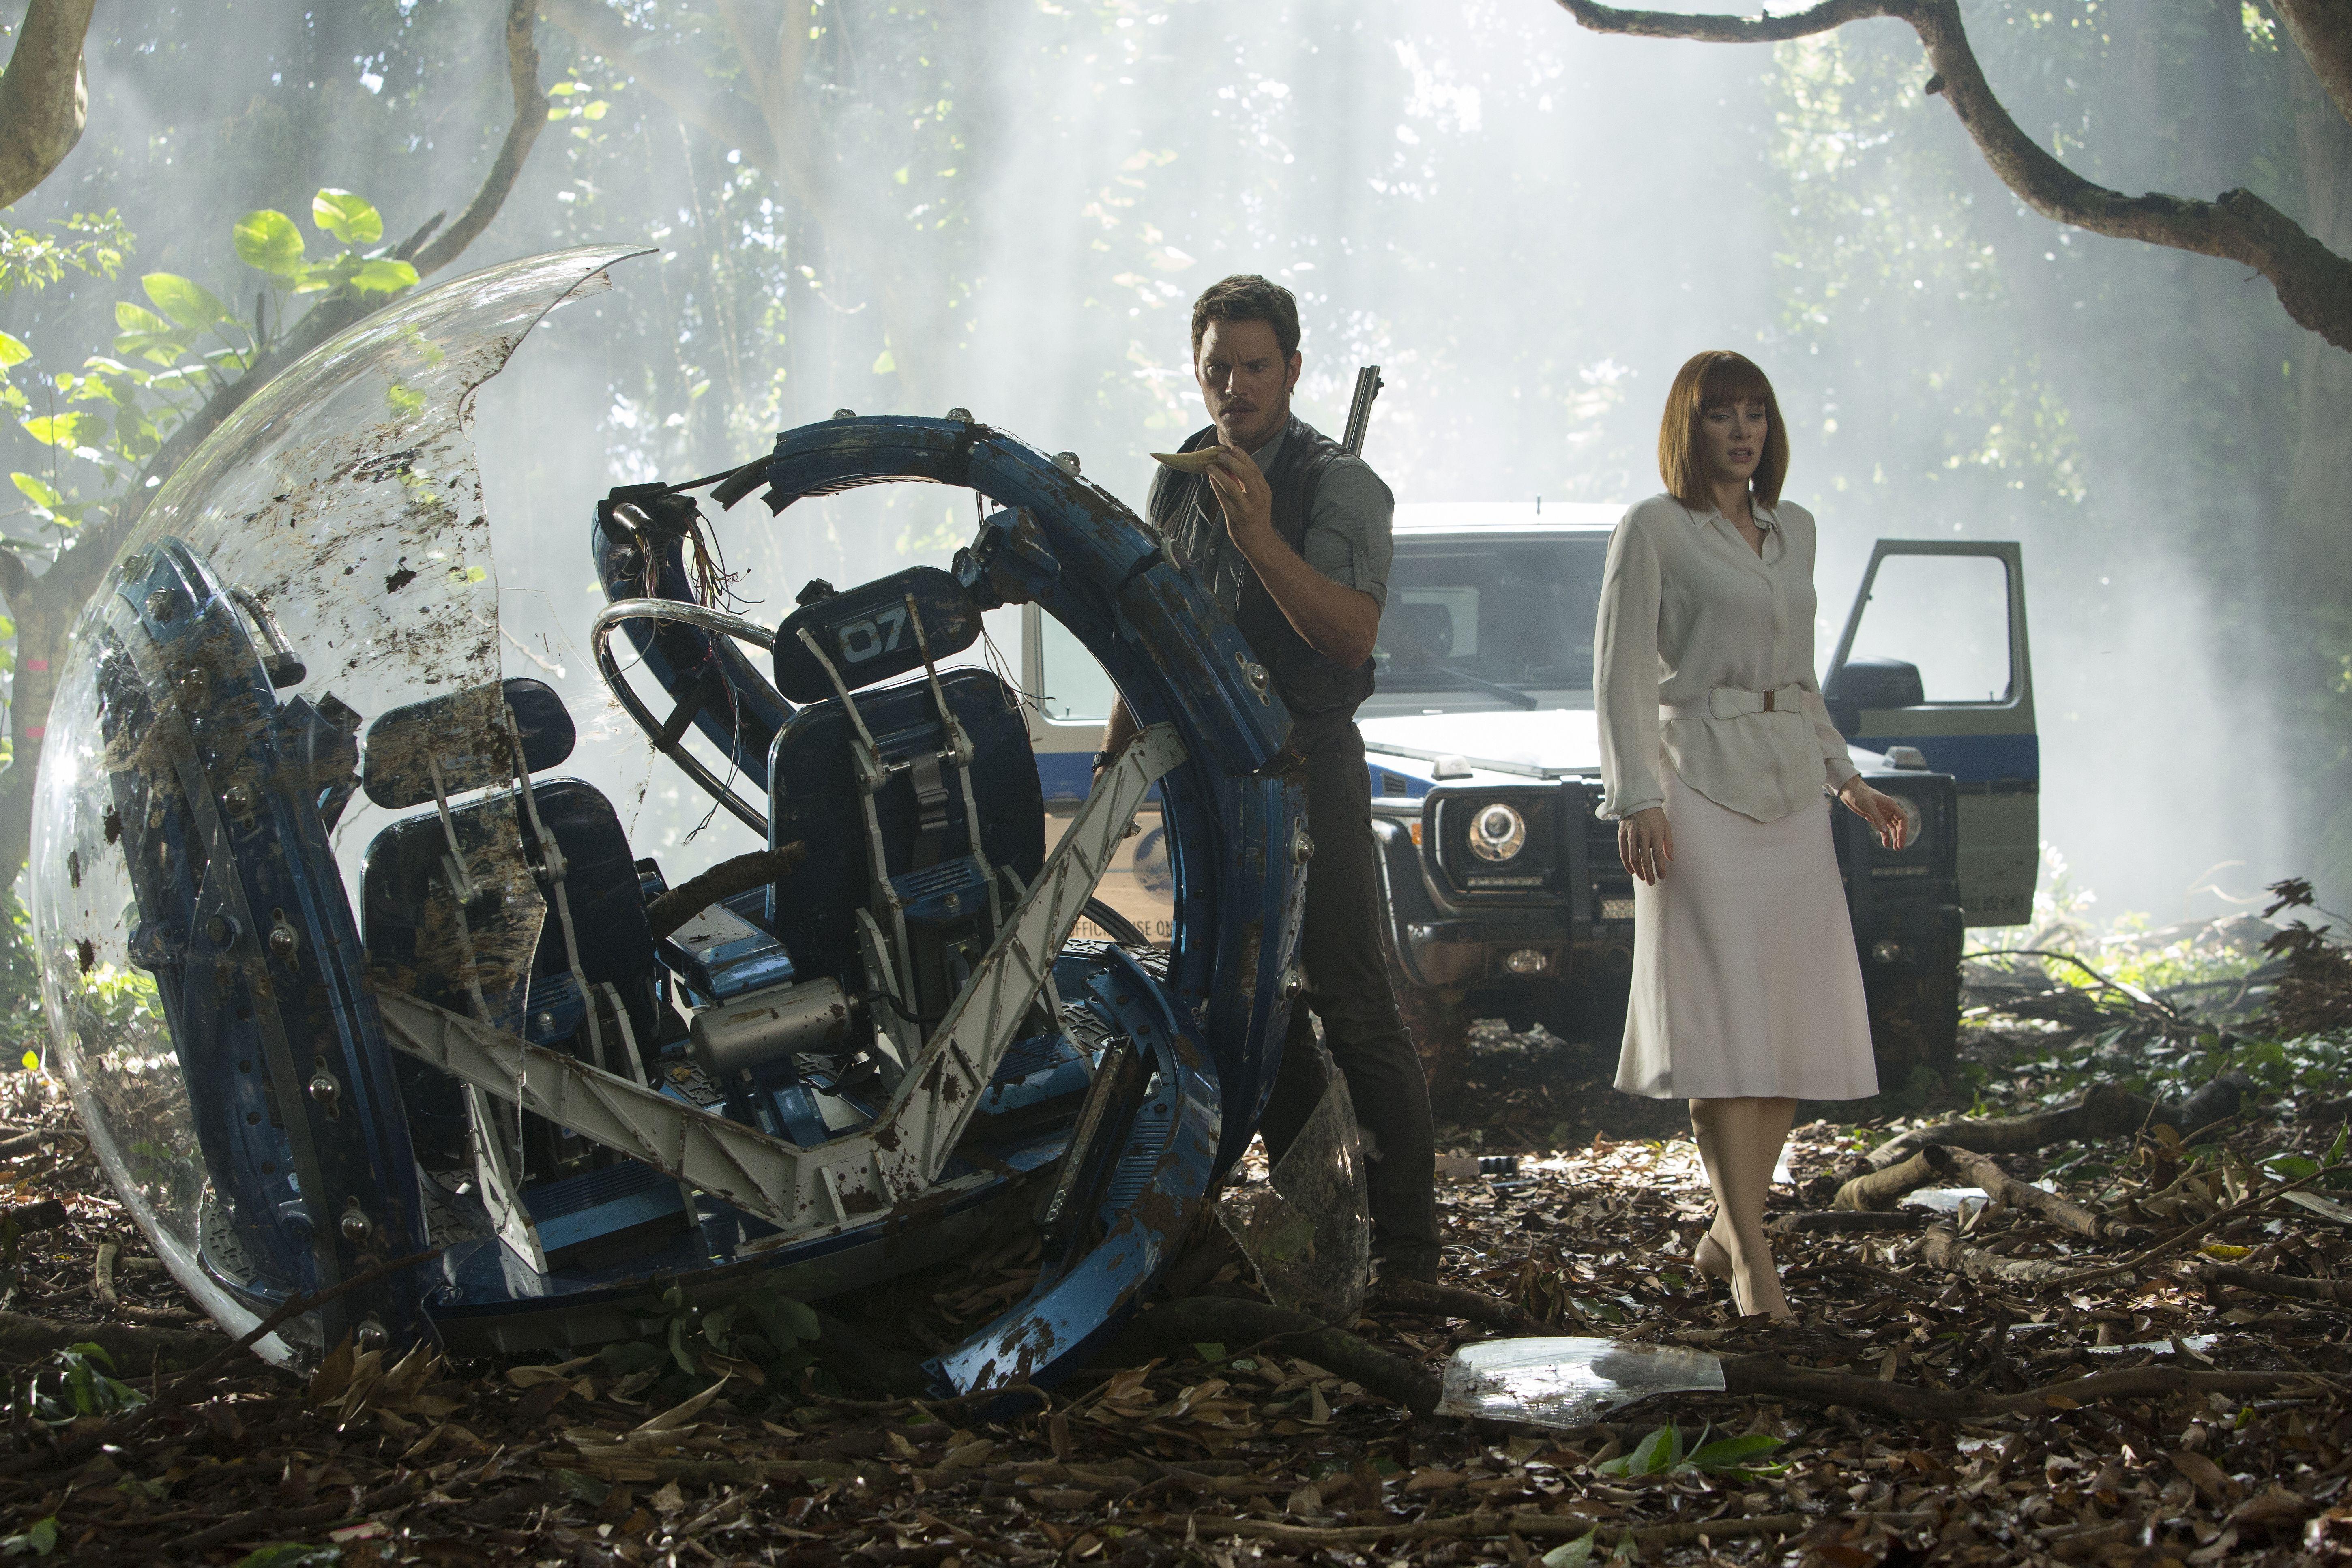 Jurassic World HD Wallpaper and Background Image